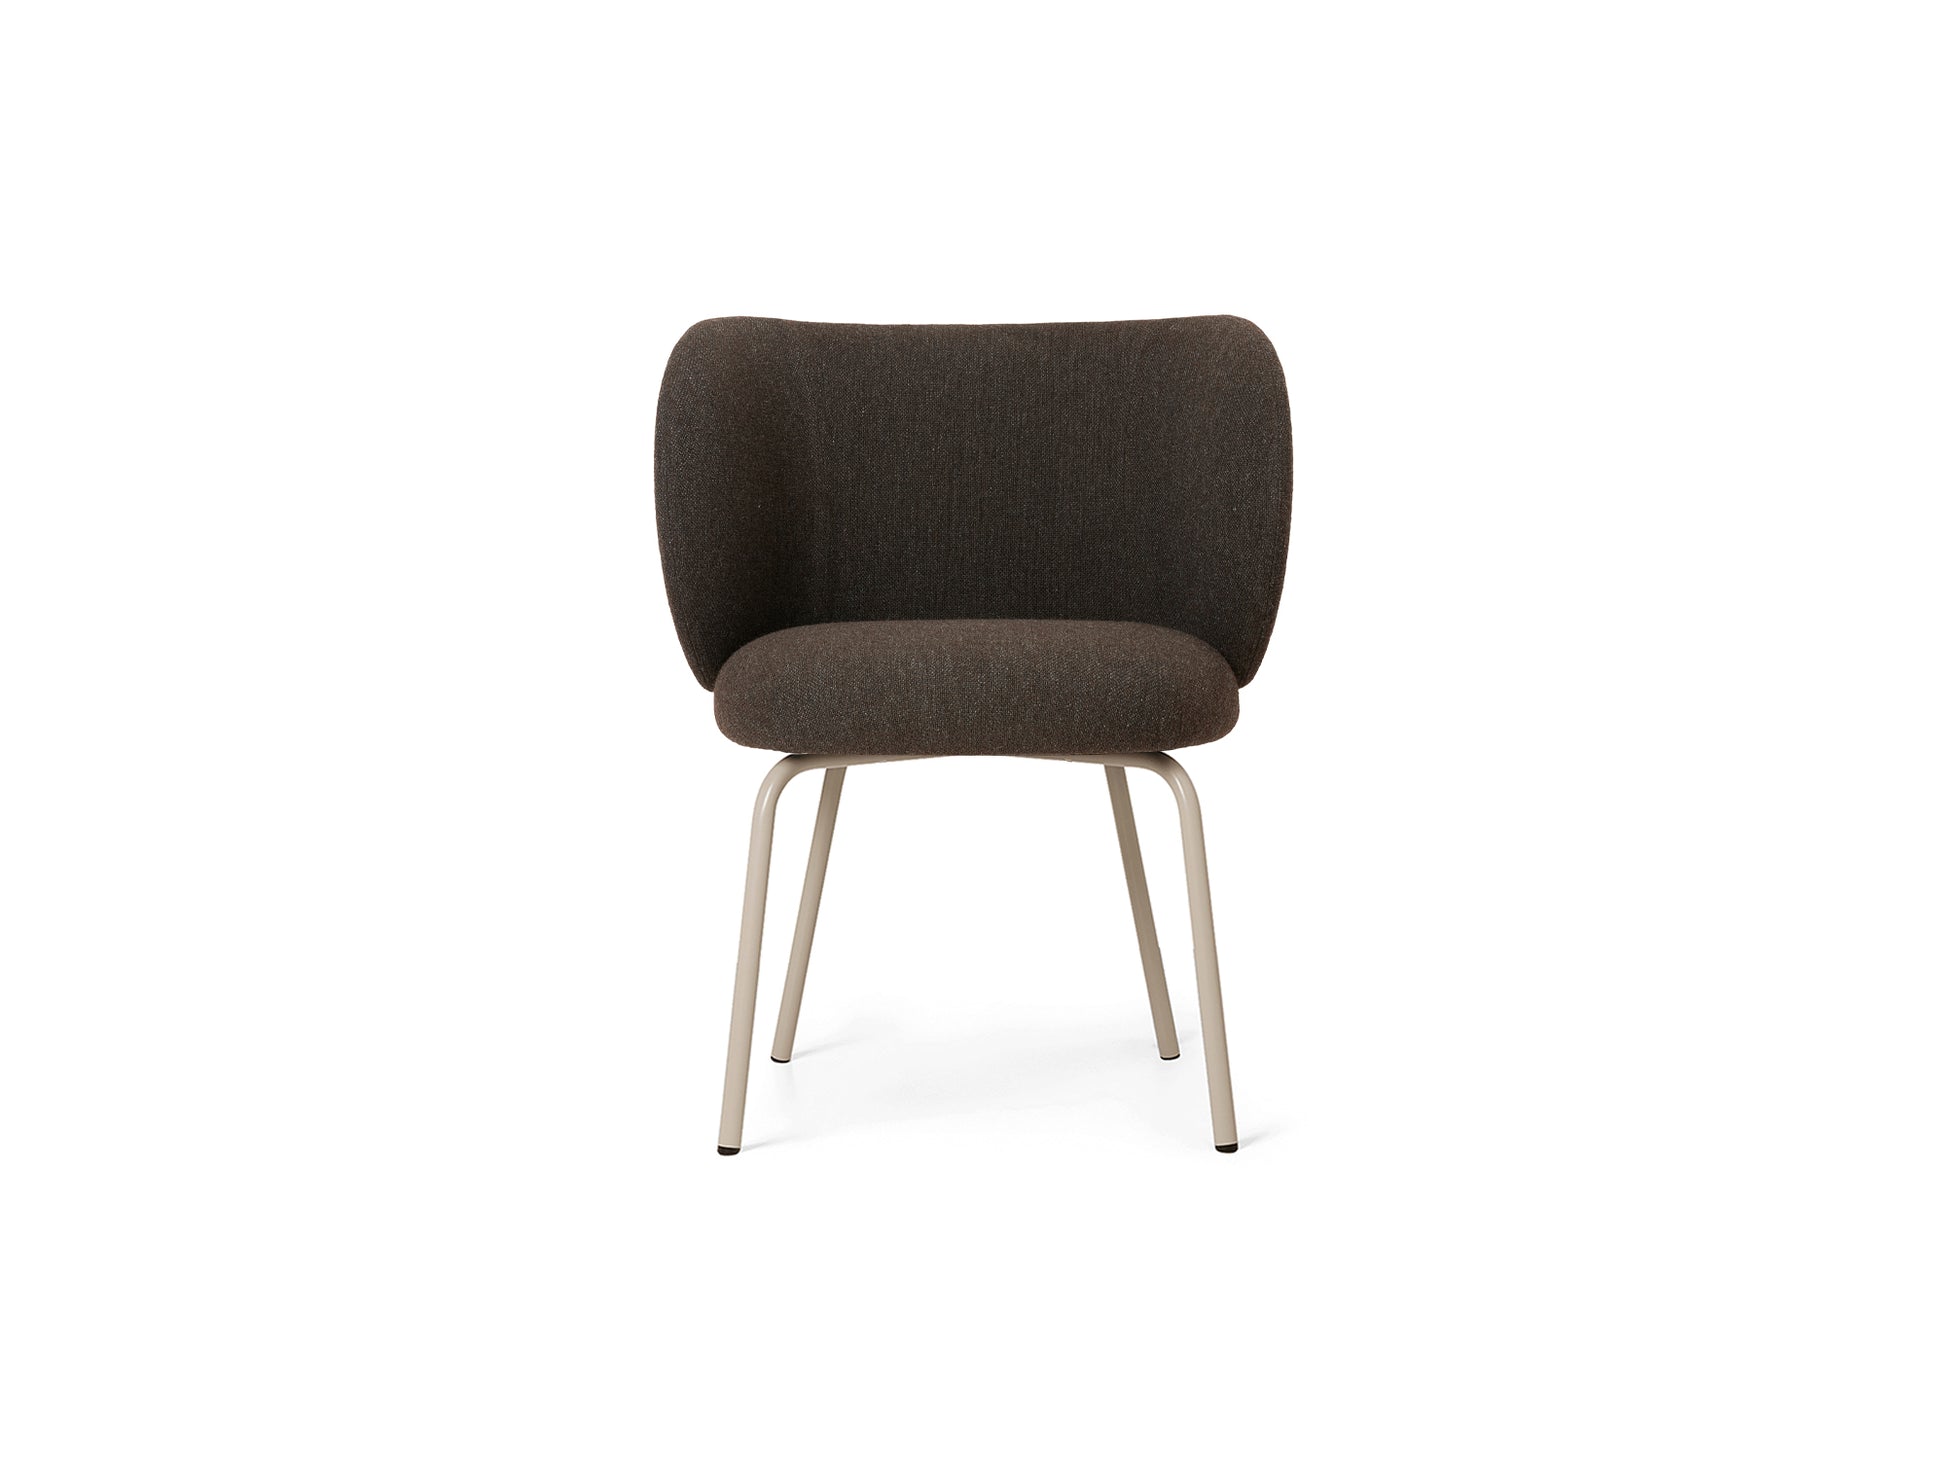 Rico Dining Chair - Fixed Base by Ferm Living - Hallingdal 65 376 / Cashmere Base